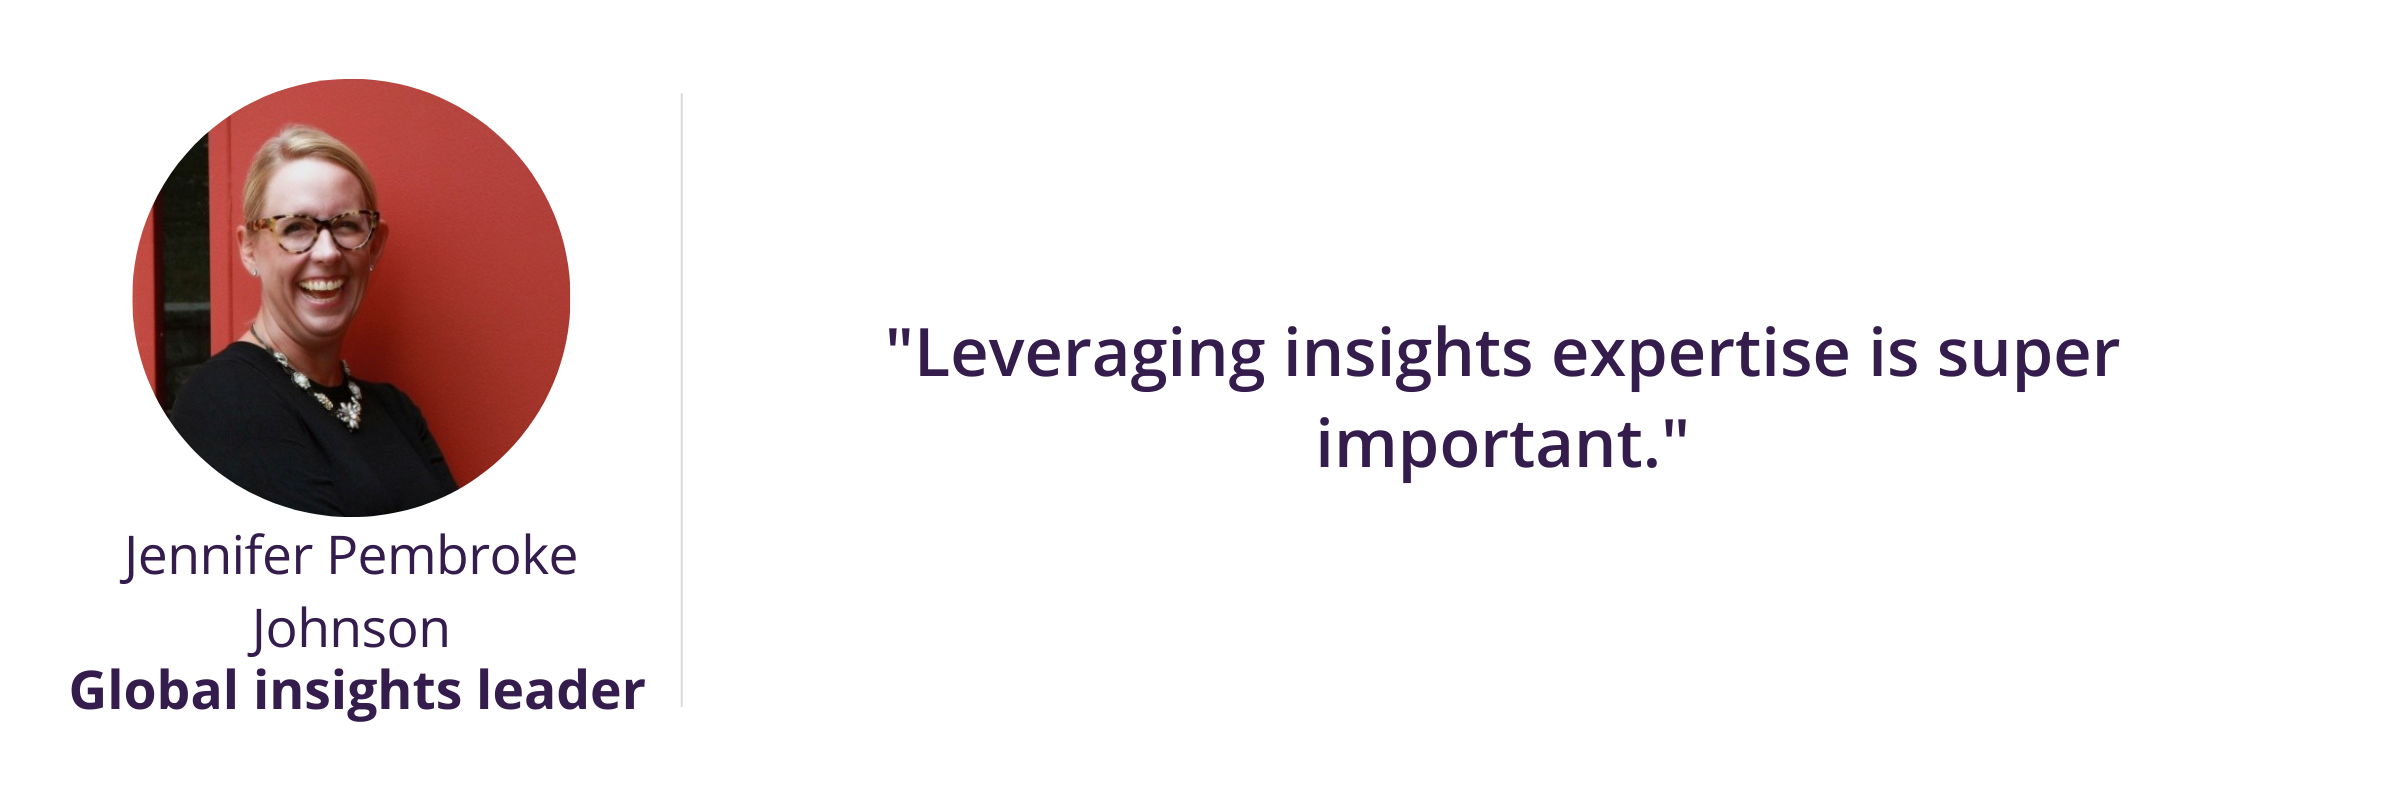 "Leveraging insights expertise is super important."